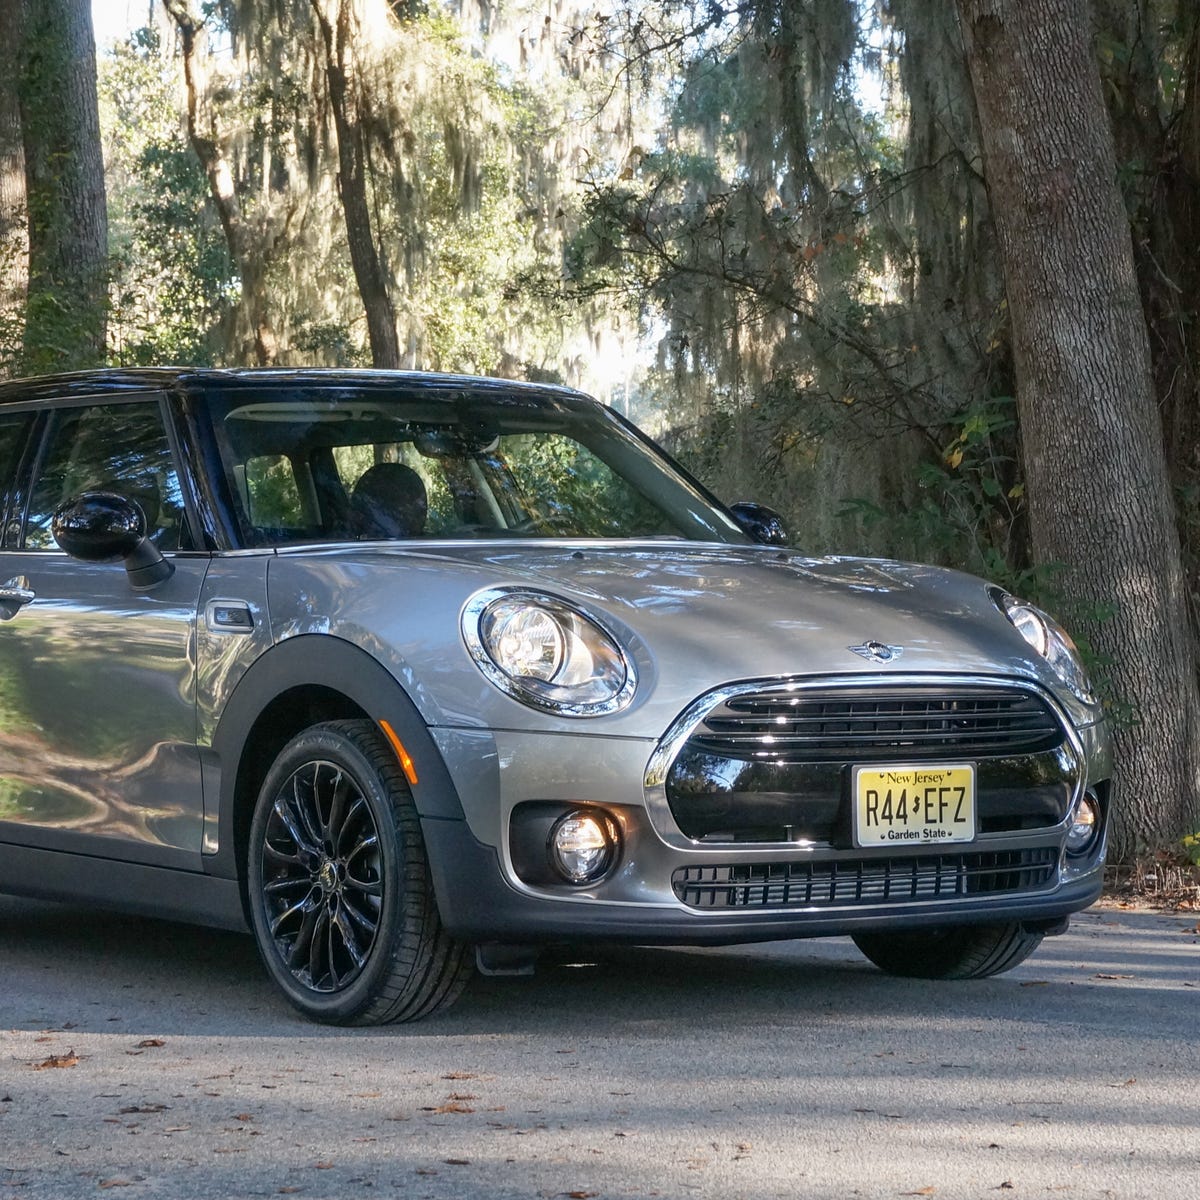 2016 Mini Cooper Clubman review: New 2016 Mini Clubman is the longest, most  capacious Cooper yet - CNET